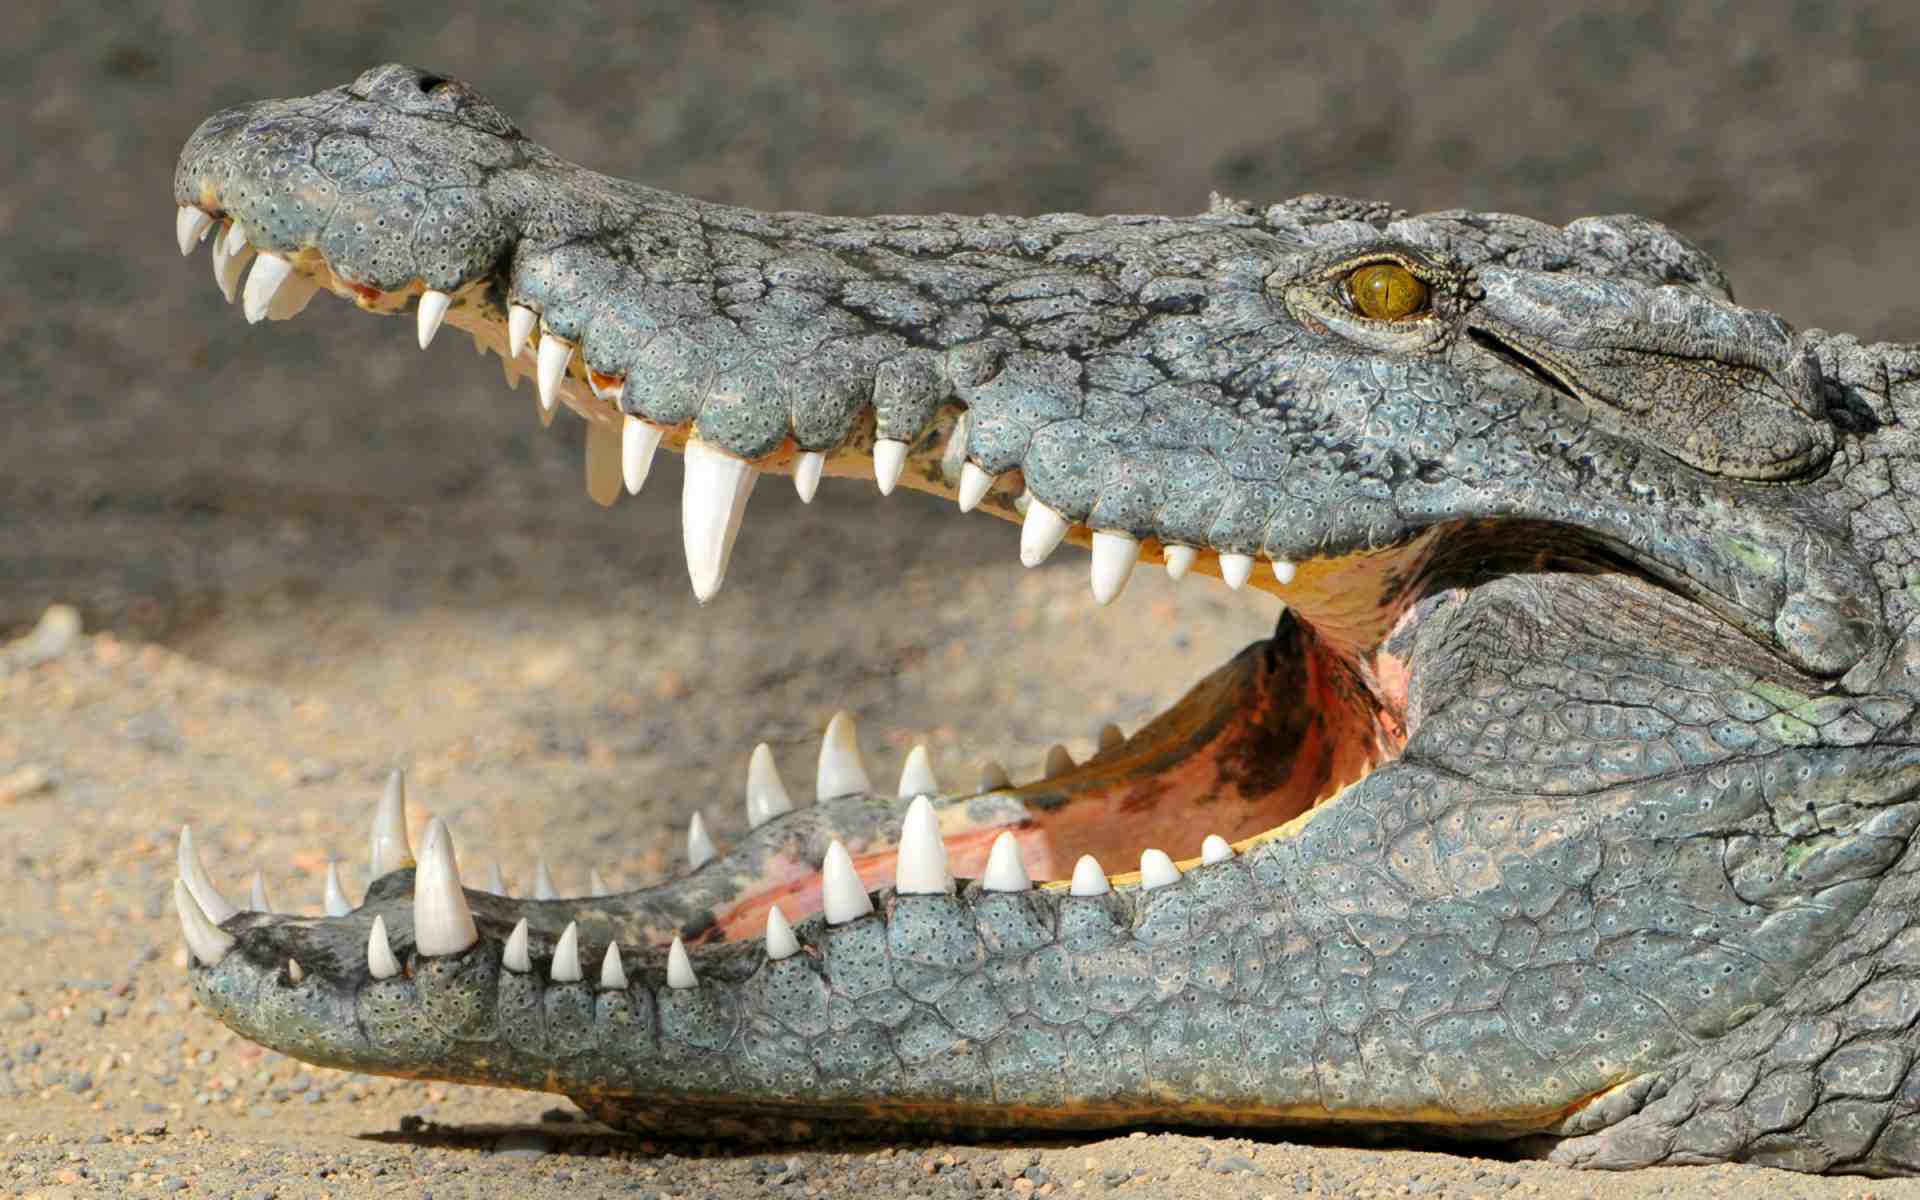 DOWNLOAD: crocodile with open mouth free picture 2560 x 1600